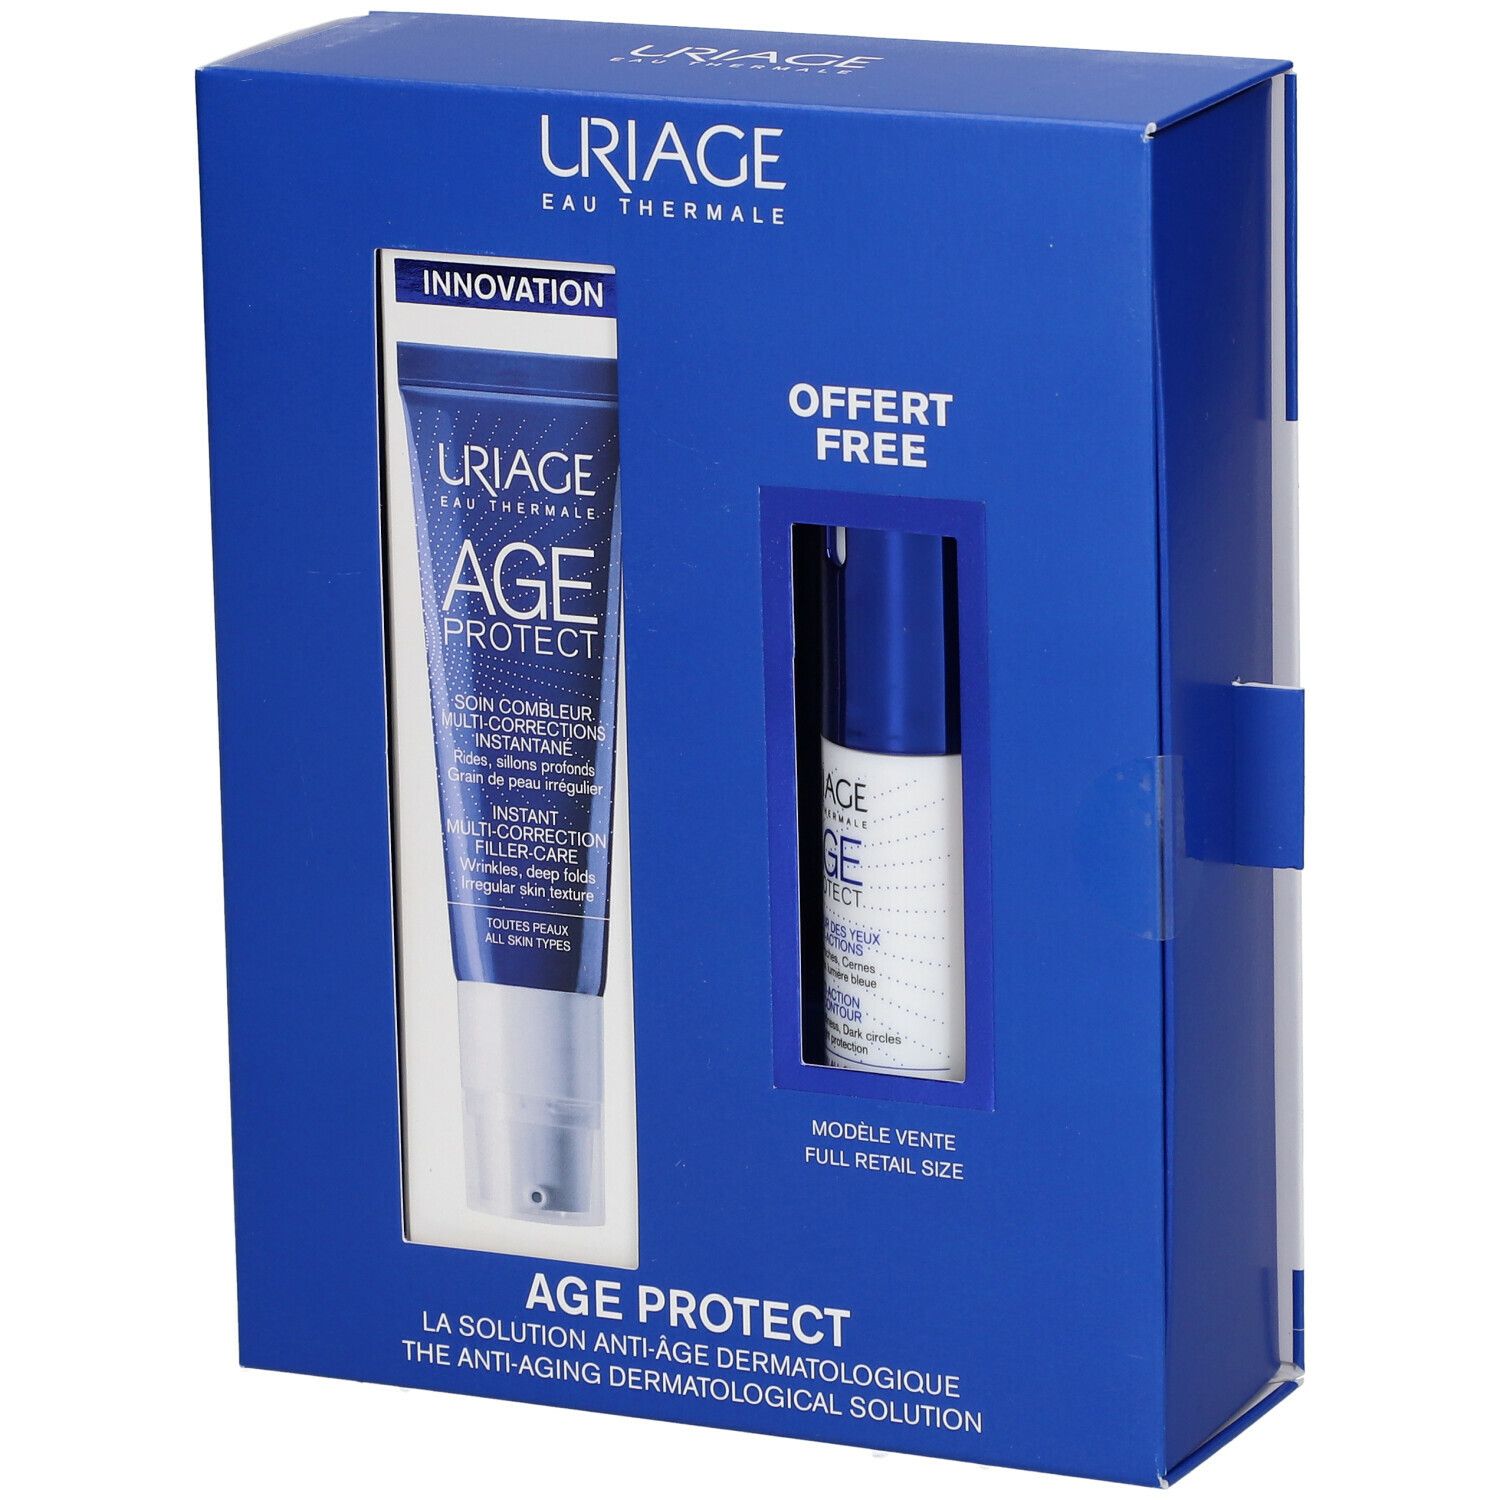 Uriage AGE Protect